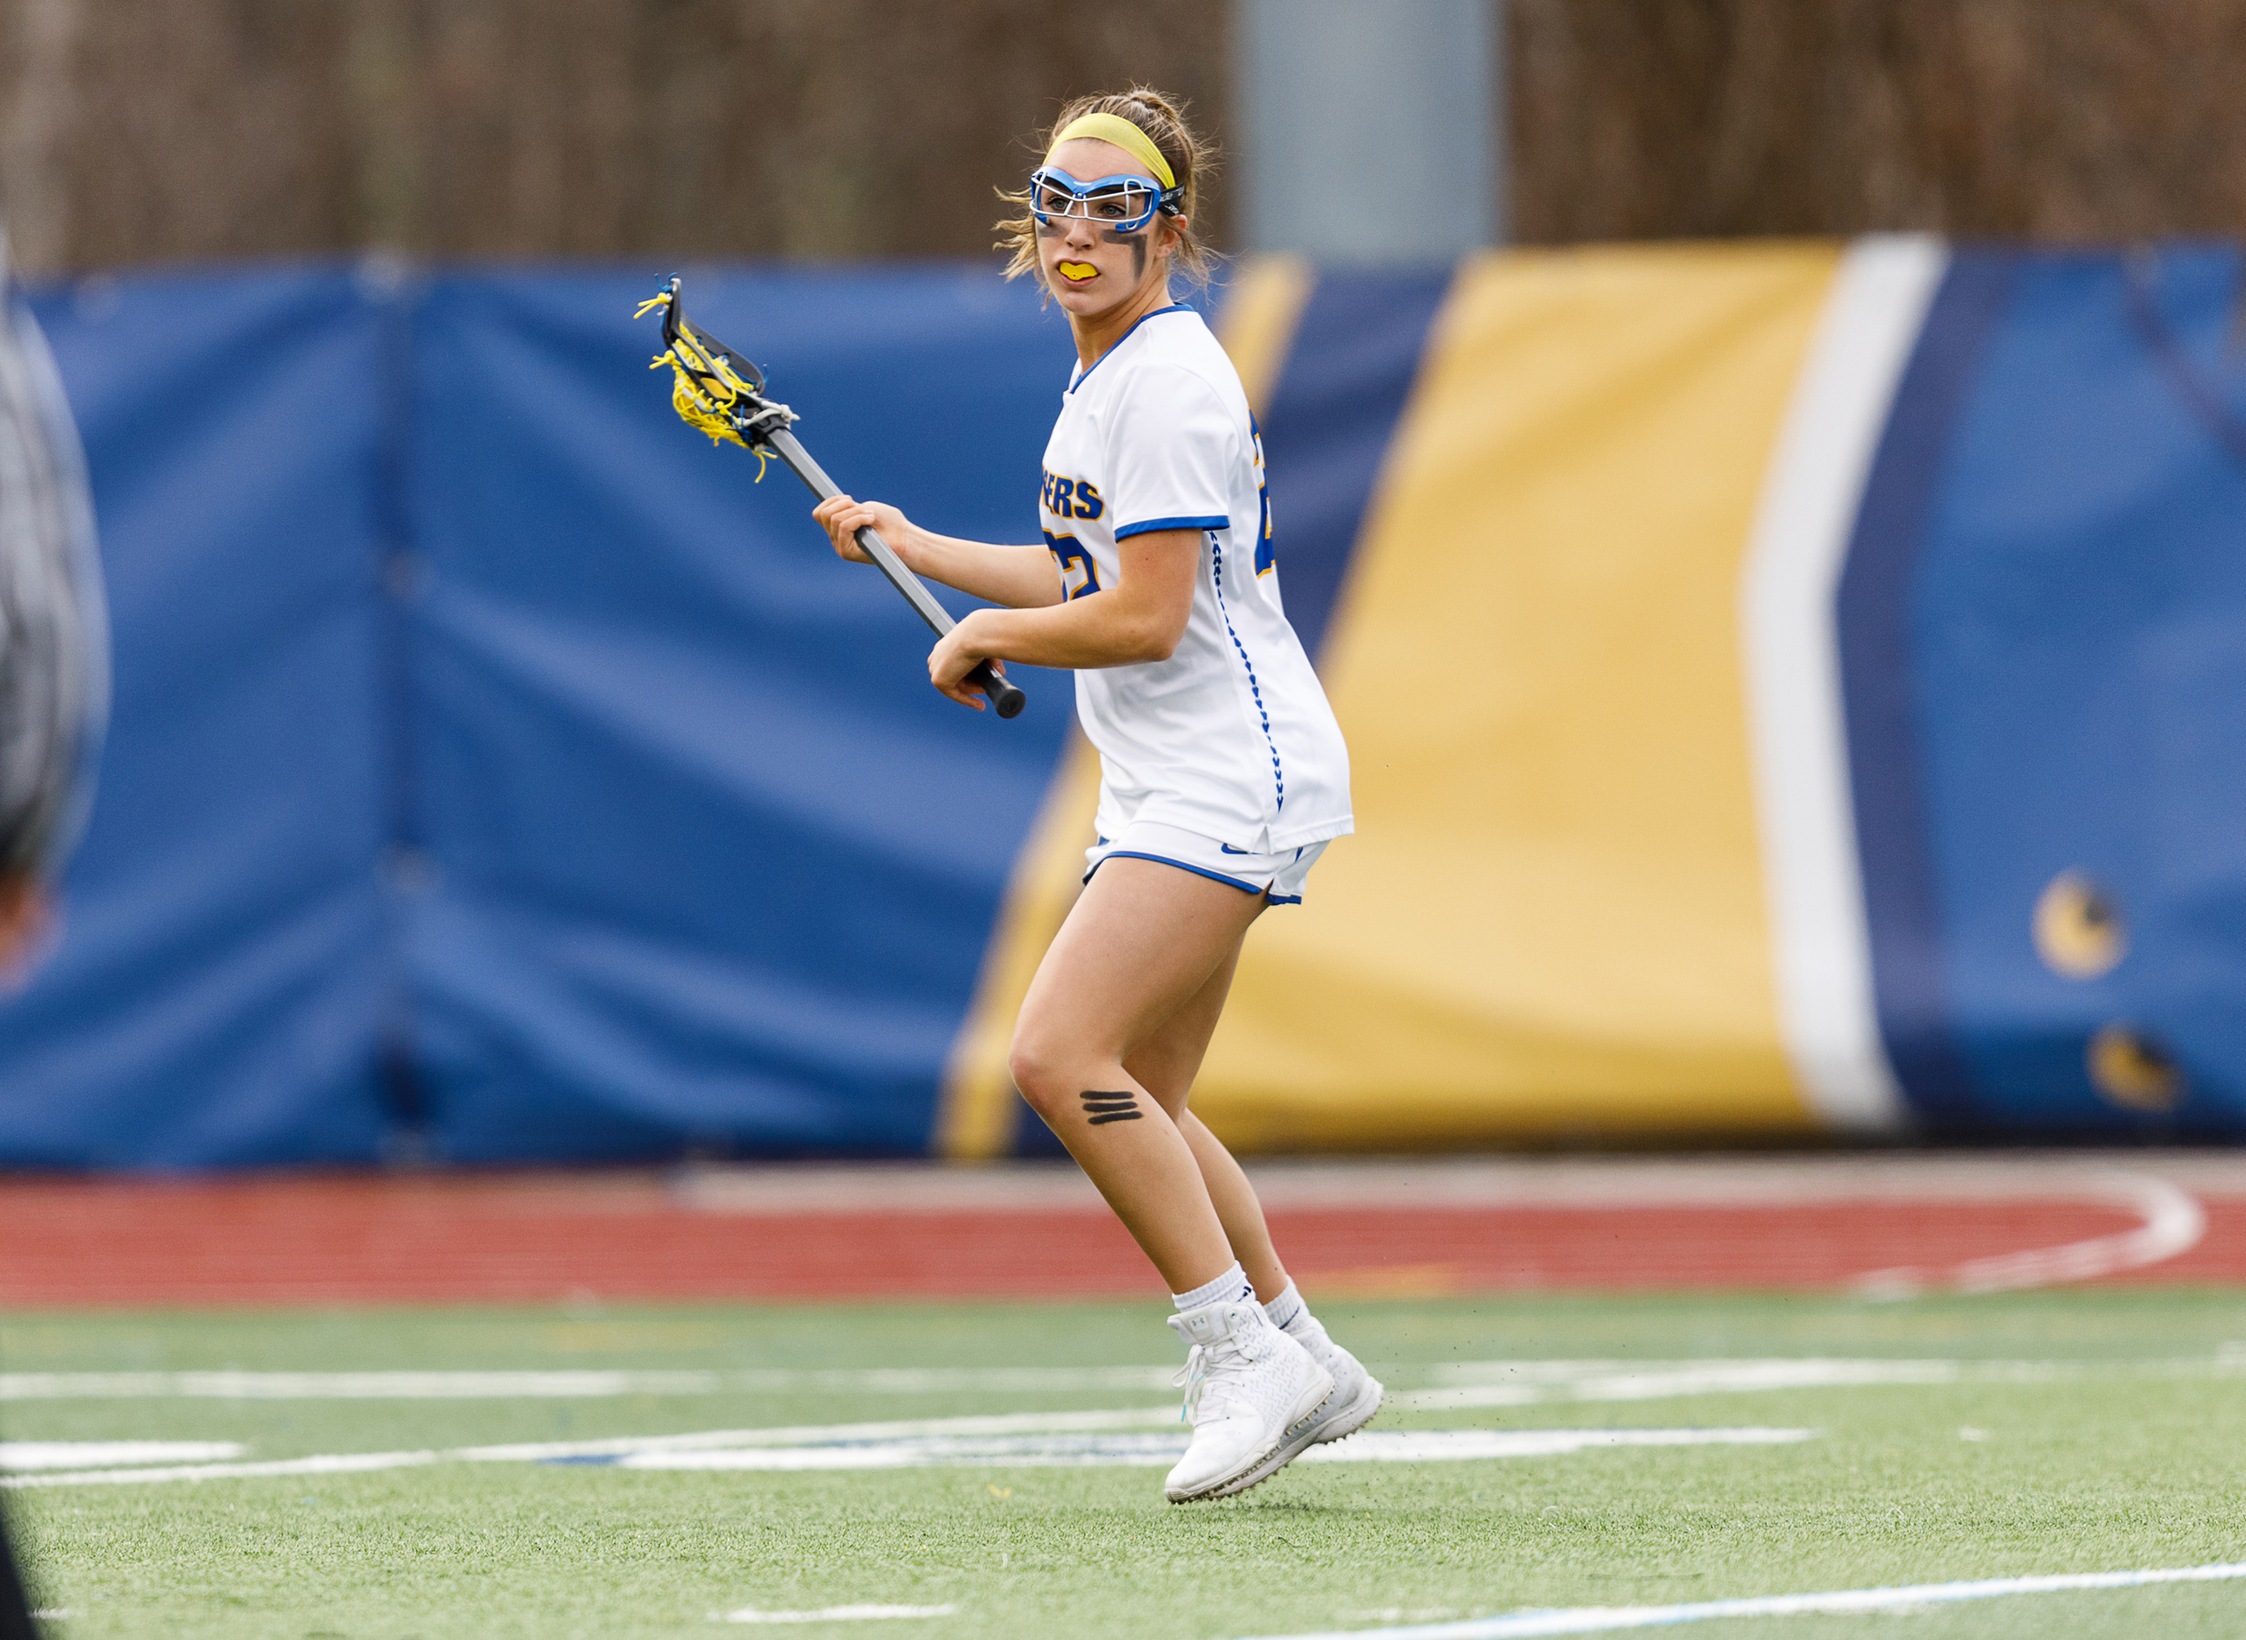 LANCERS FALL TO WESTERN CONNECTICUT, 10-6